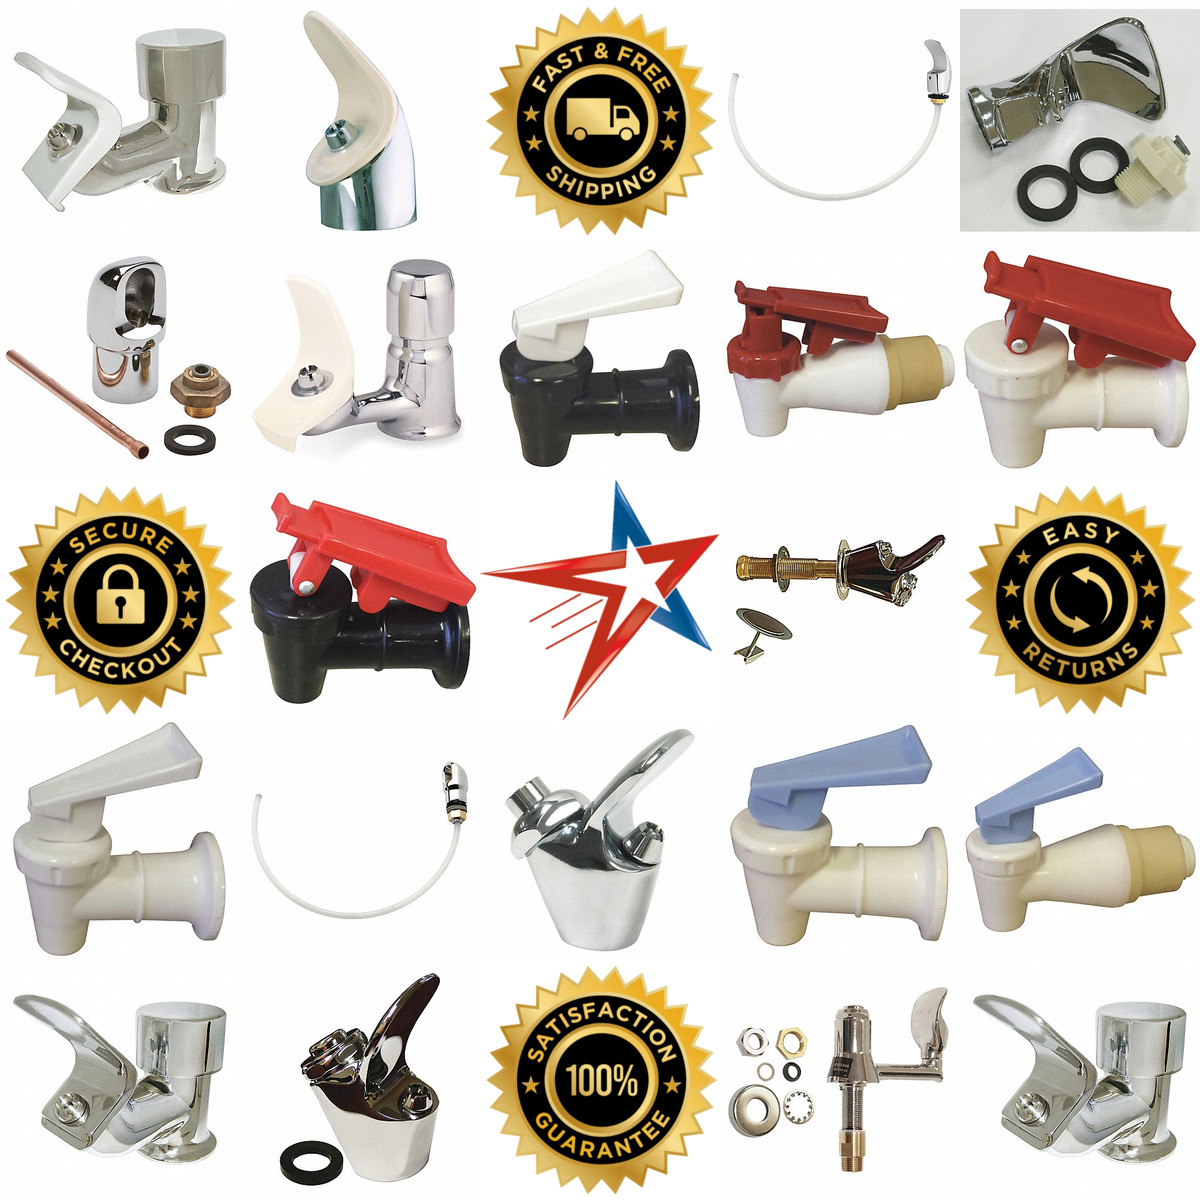 A selection of Bubblers and Dispensing Spouts products on GoVets